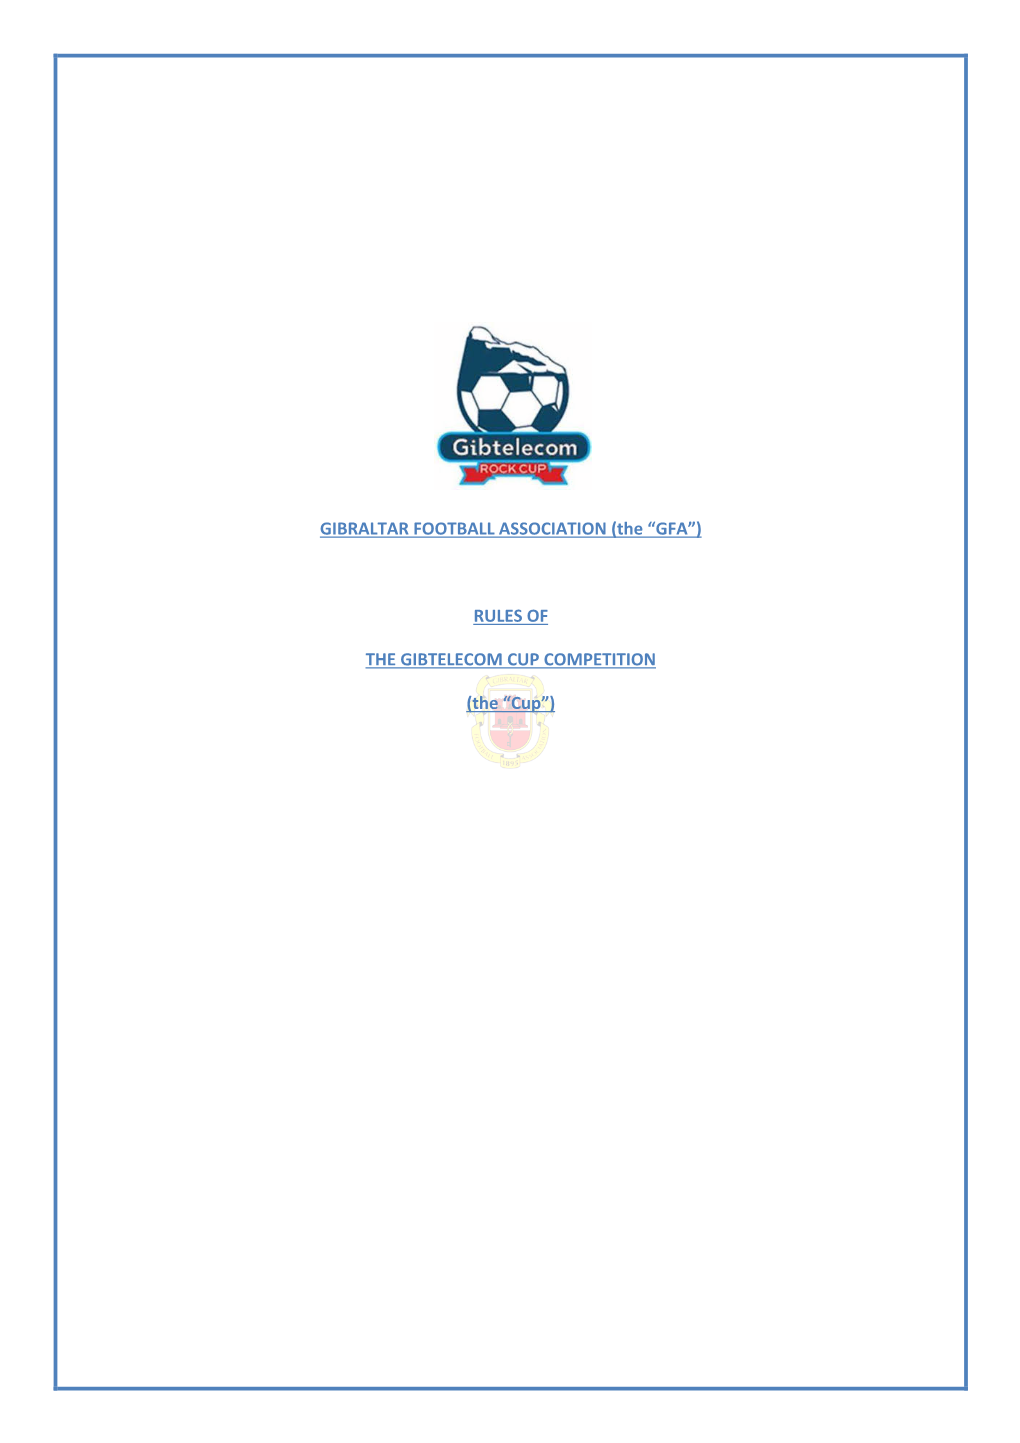 GIBRALTAR FOOTBALL ASSOCIATION (The “GFA”) RULES of the GIBTELECOM CUP COMPETITION (The “Cup”)